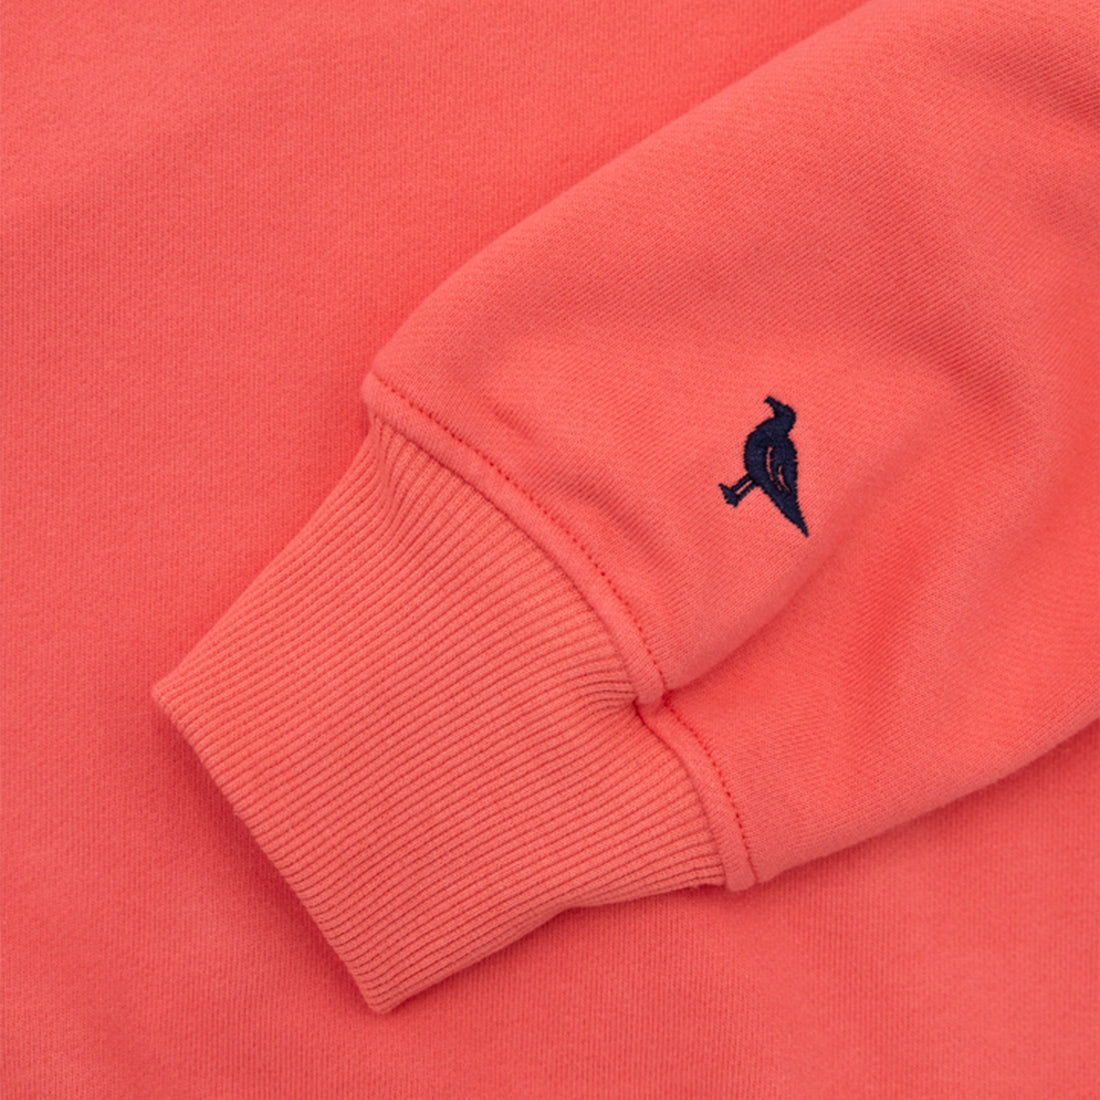 Mystic Crewneck in Coral Red